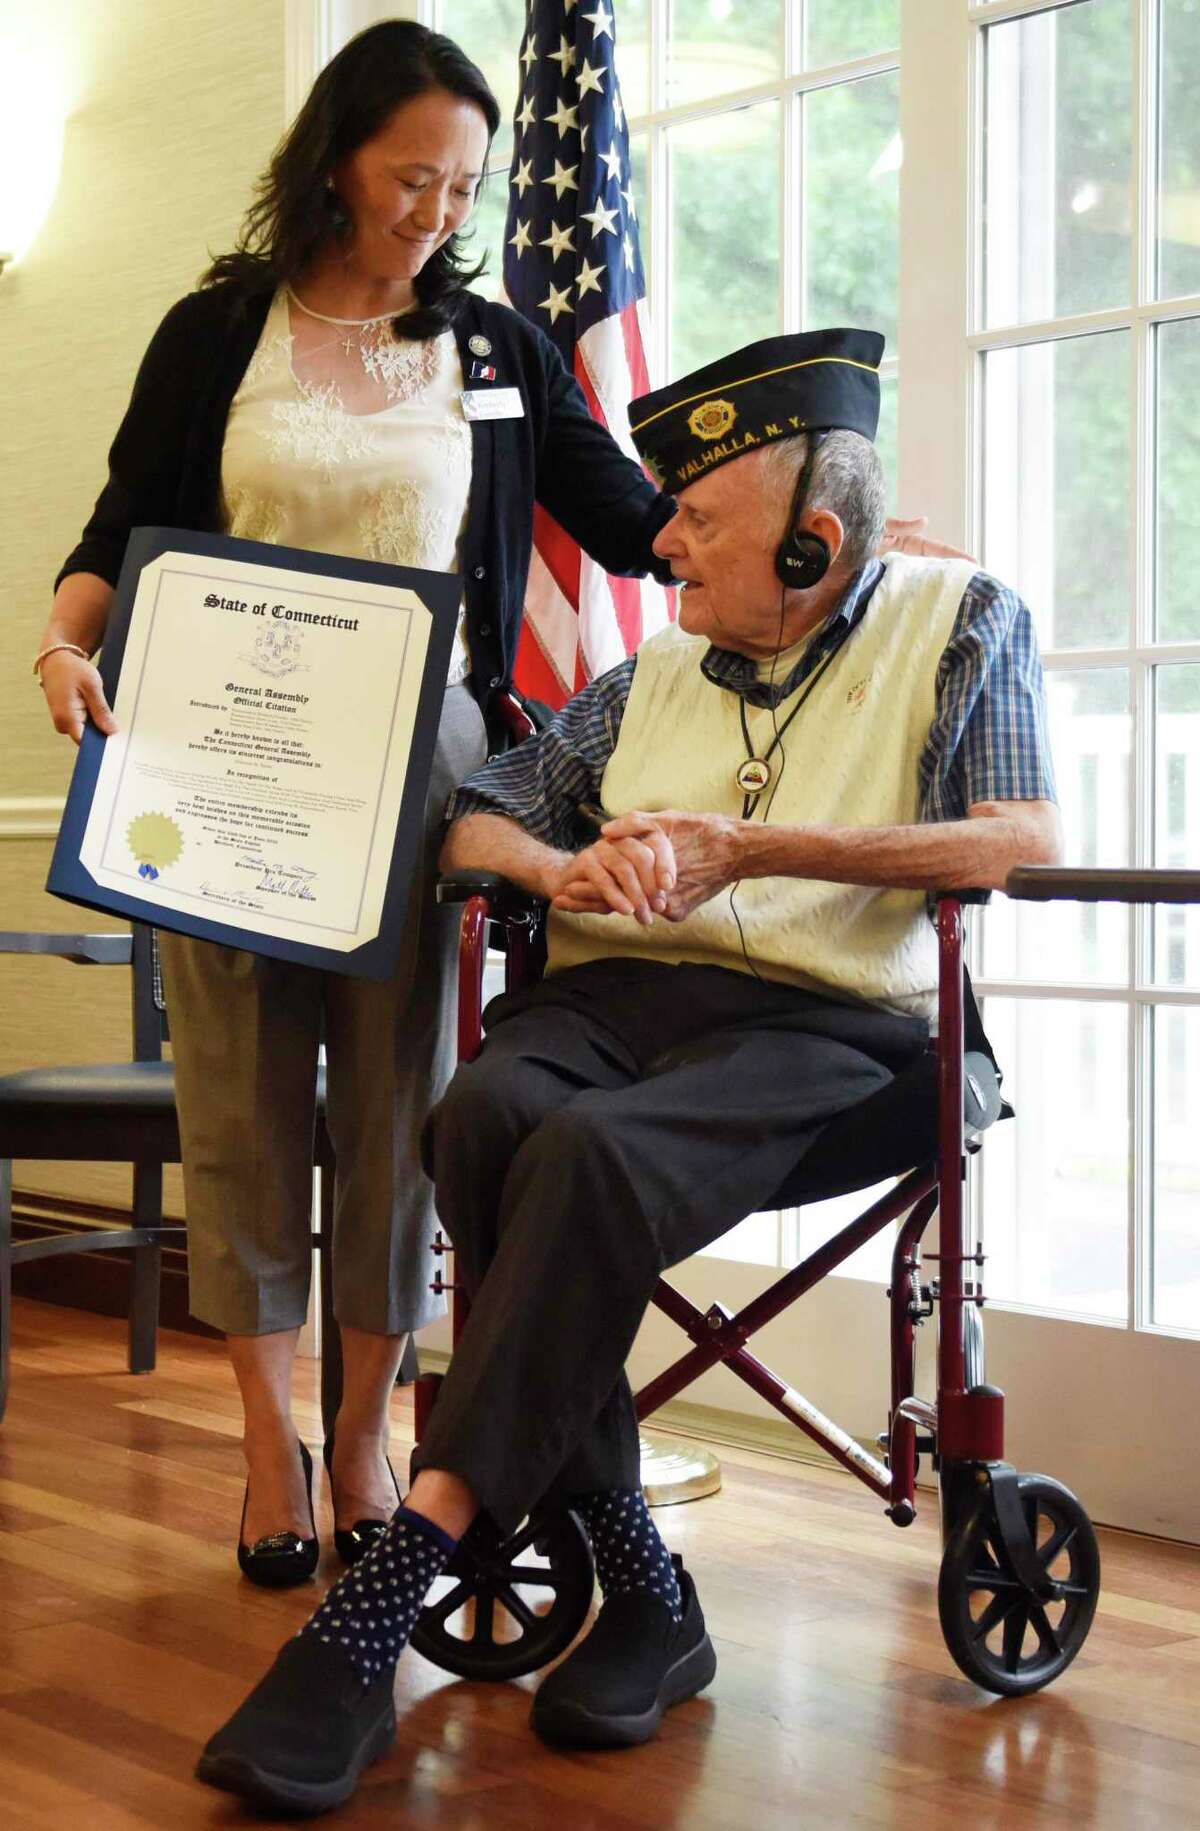 State Rep. Kimberly Fiorello presents U.S. Army Cpl. Edmund Burke with an official citation from the Connecticut General Assembly during a ceremony honoring his service at Parsonage Cottage in Greenwich, Conn. Wednesday, June 22, 2022. Burke was honored for his service and heroism as a machine gunner in World War II in a special ceremony Wednesday.